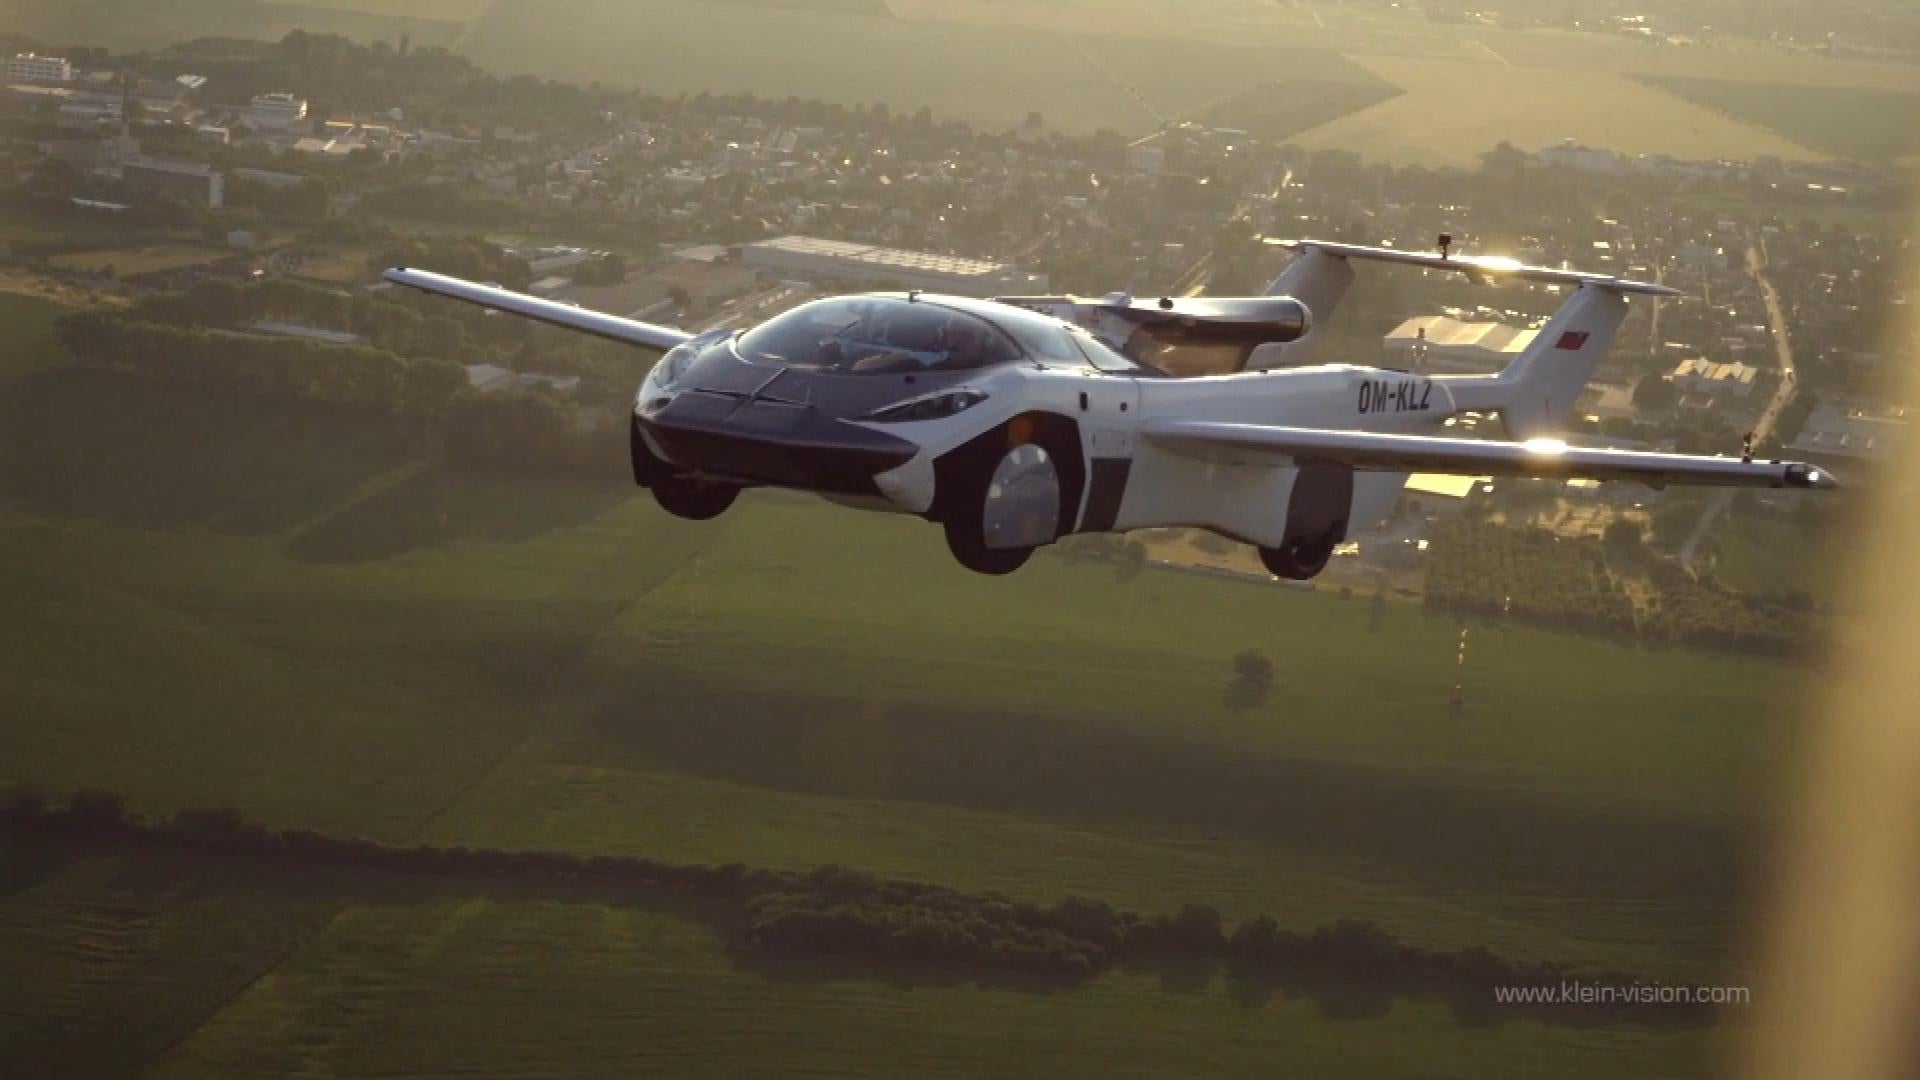 Flying car completes test flight between airports